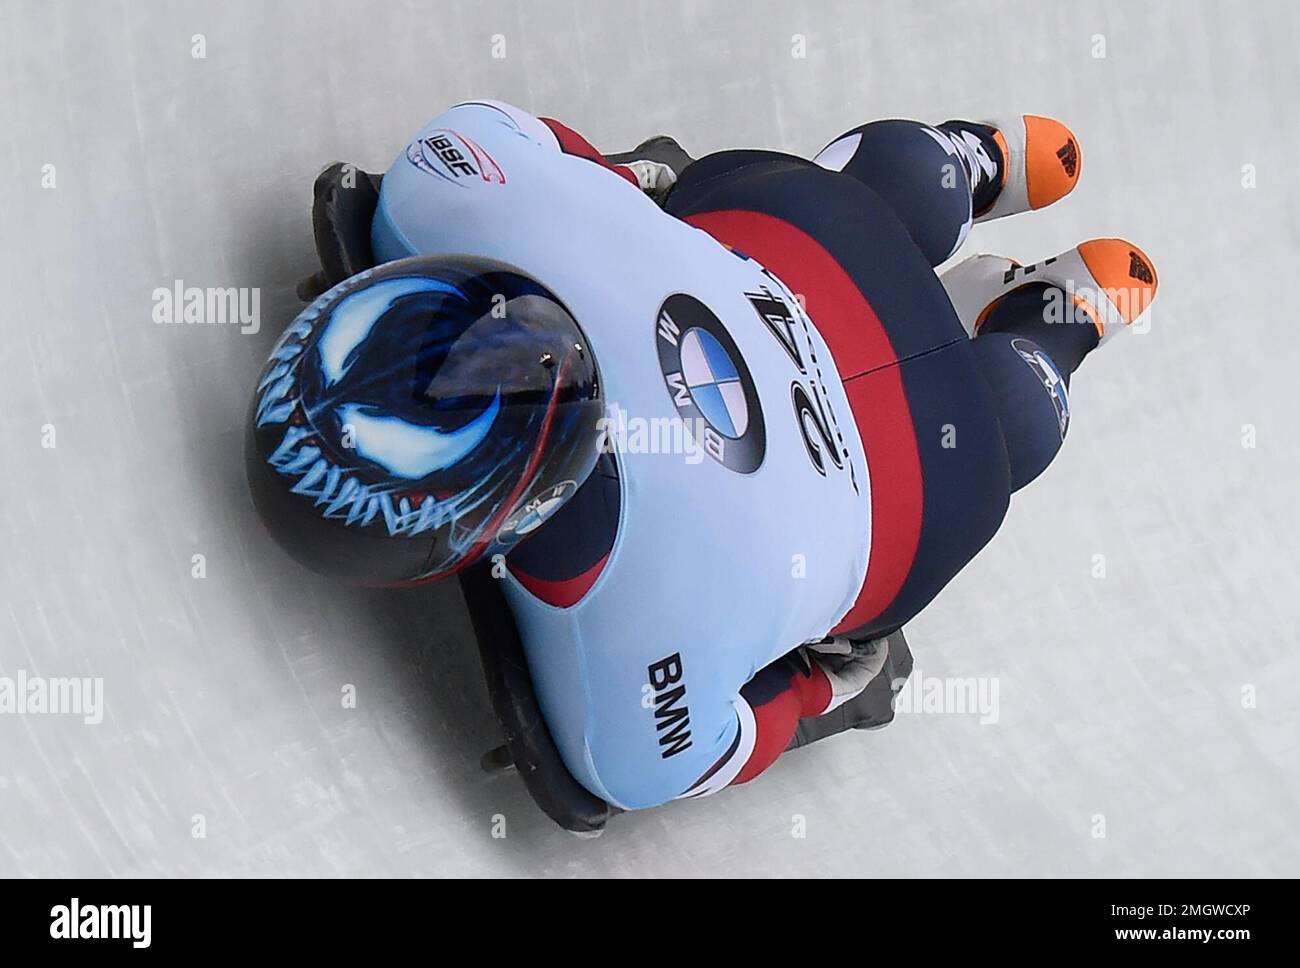 Austin Florian of the United States competes during the men Skeleton competition at the Bobsleigh and Skeleton World Championships in Altenberg, eastern Germany, Thursday, Feb